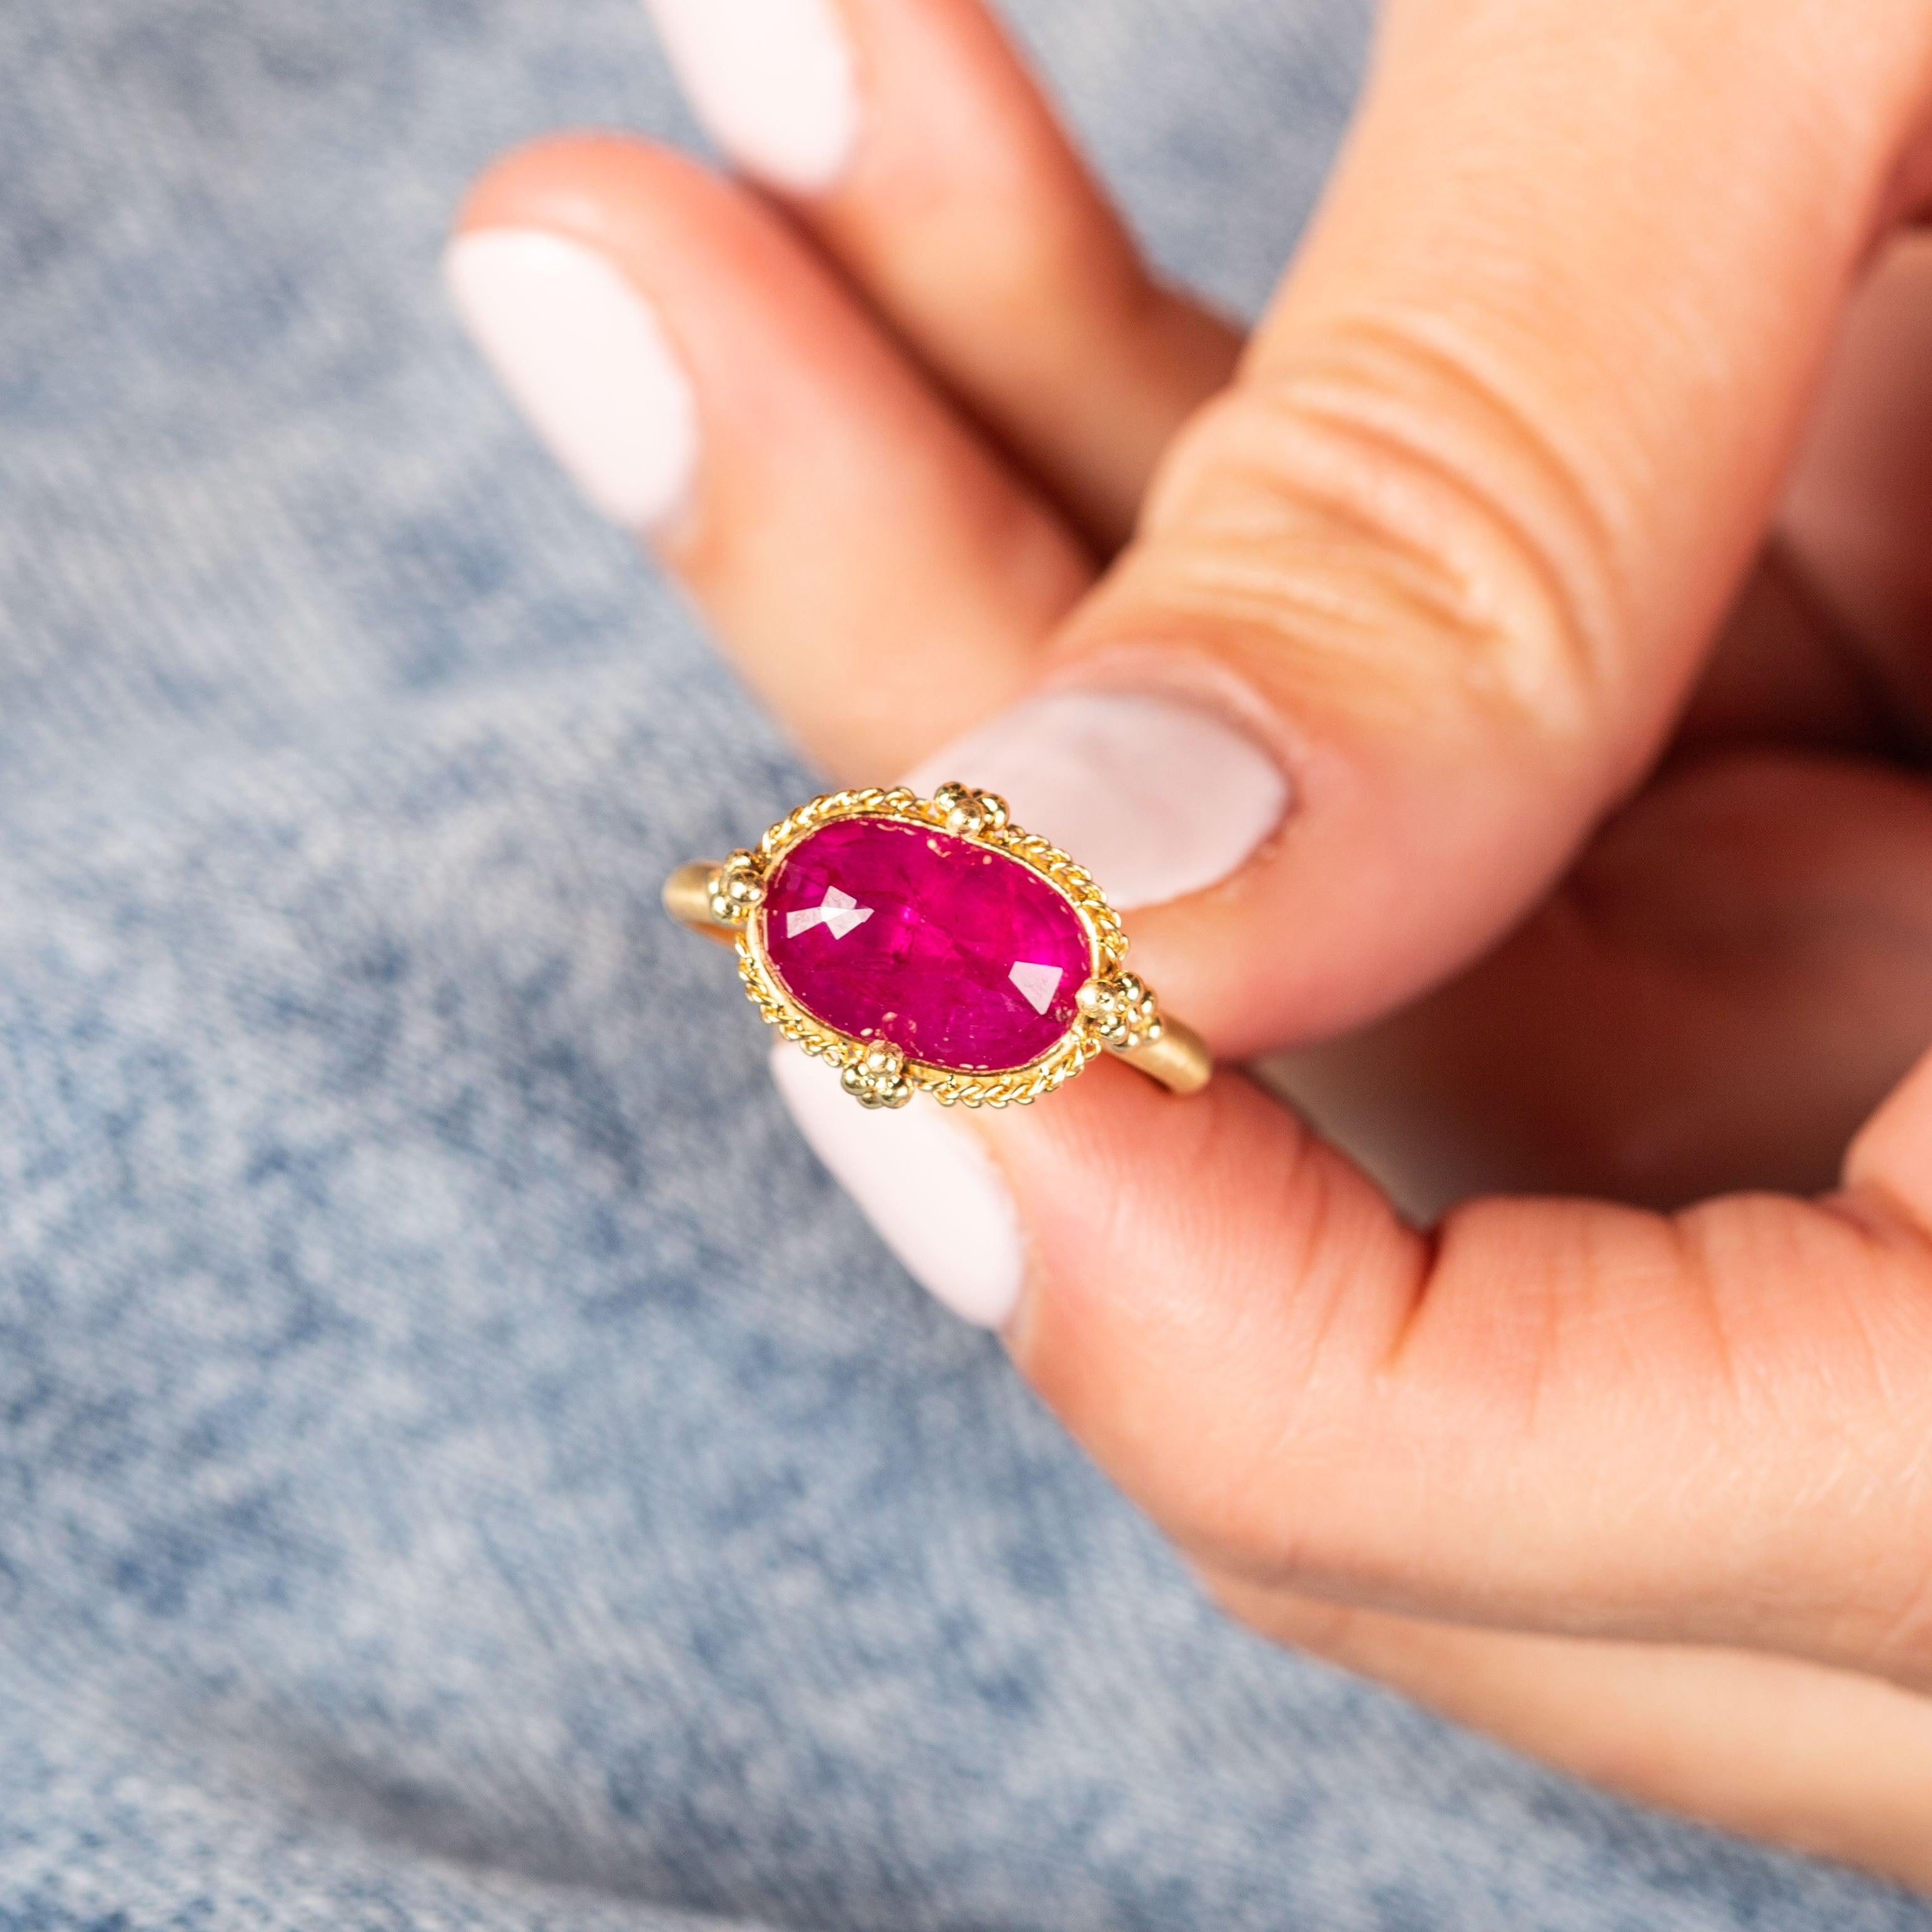 This Ruby ring warms and energizes with flashes of bold, crimson hues floating beneath the surface like flowing lava. To accentuate the natural beauty of this gemstone, we encased it in an intricate frame of golden chain and delicate beaded prongs.